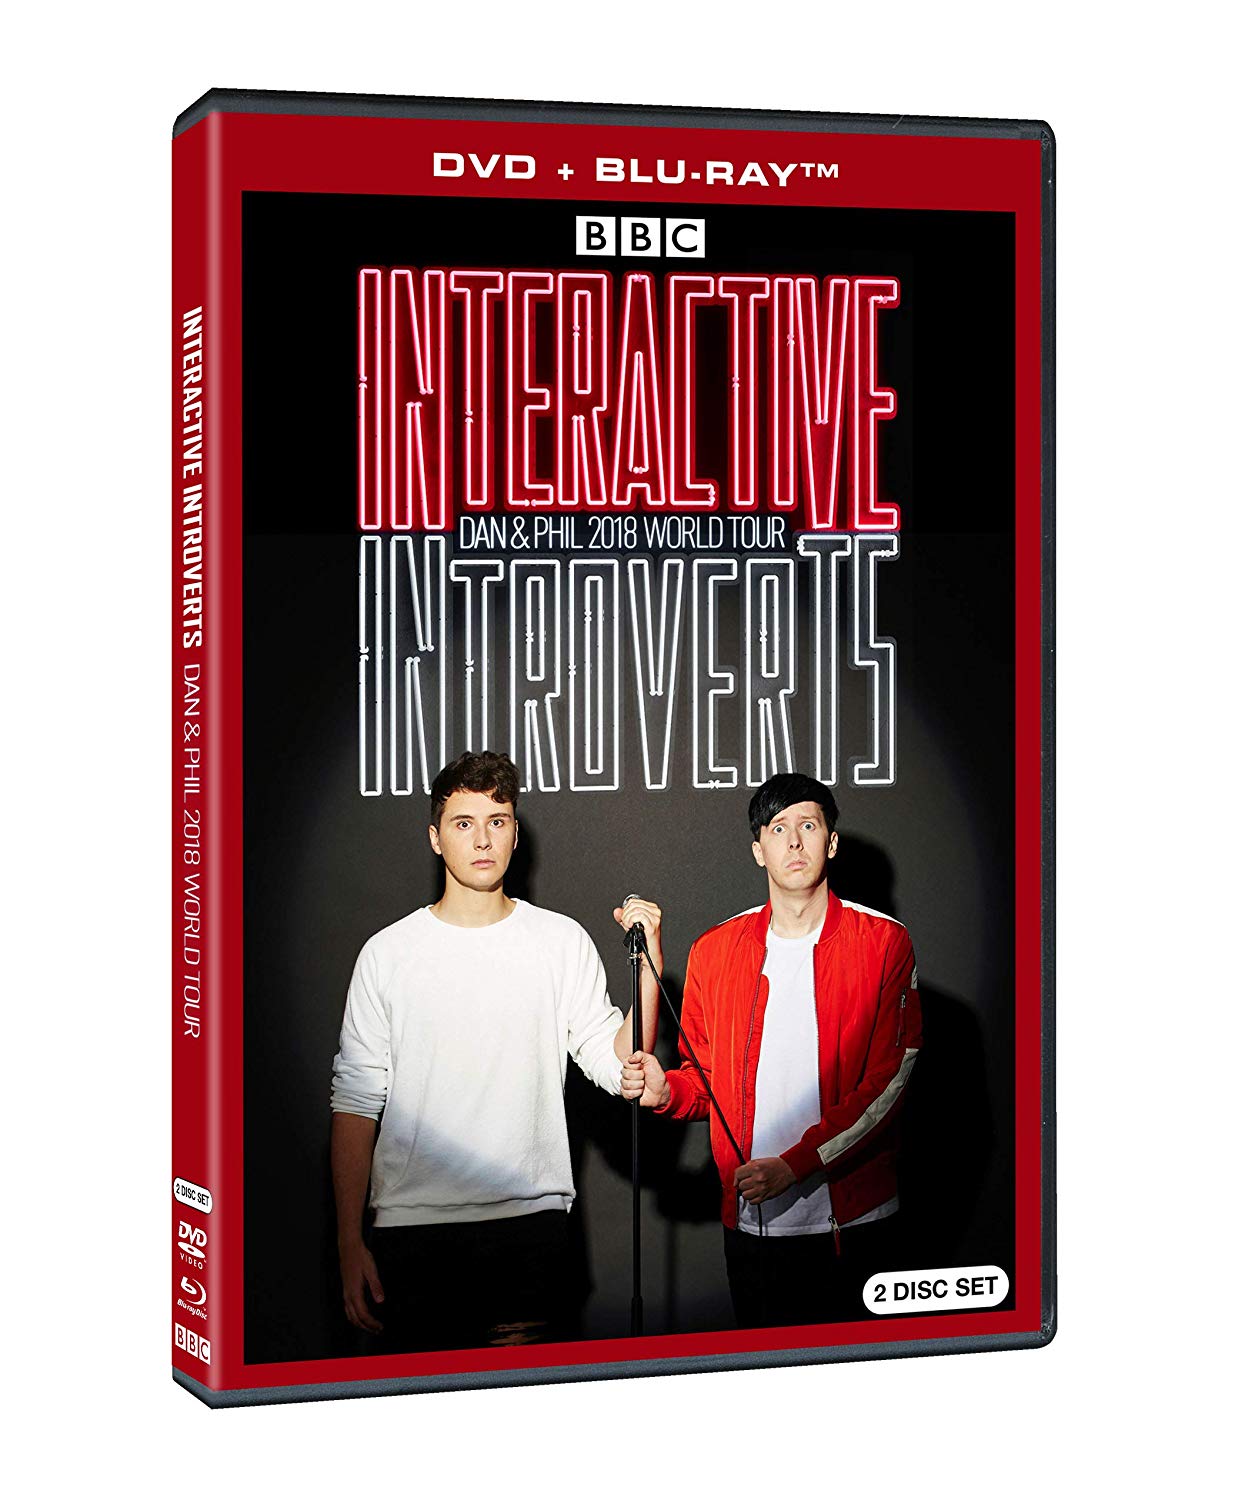 Dan And Phil Interactive Introverts Dvd - HD Wallpaper 